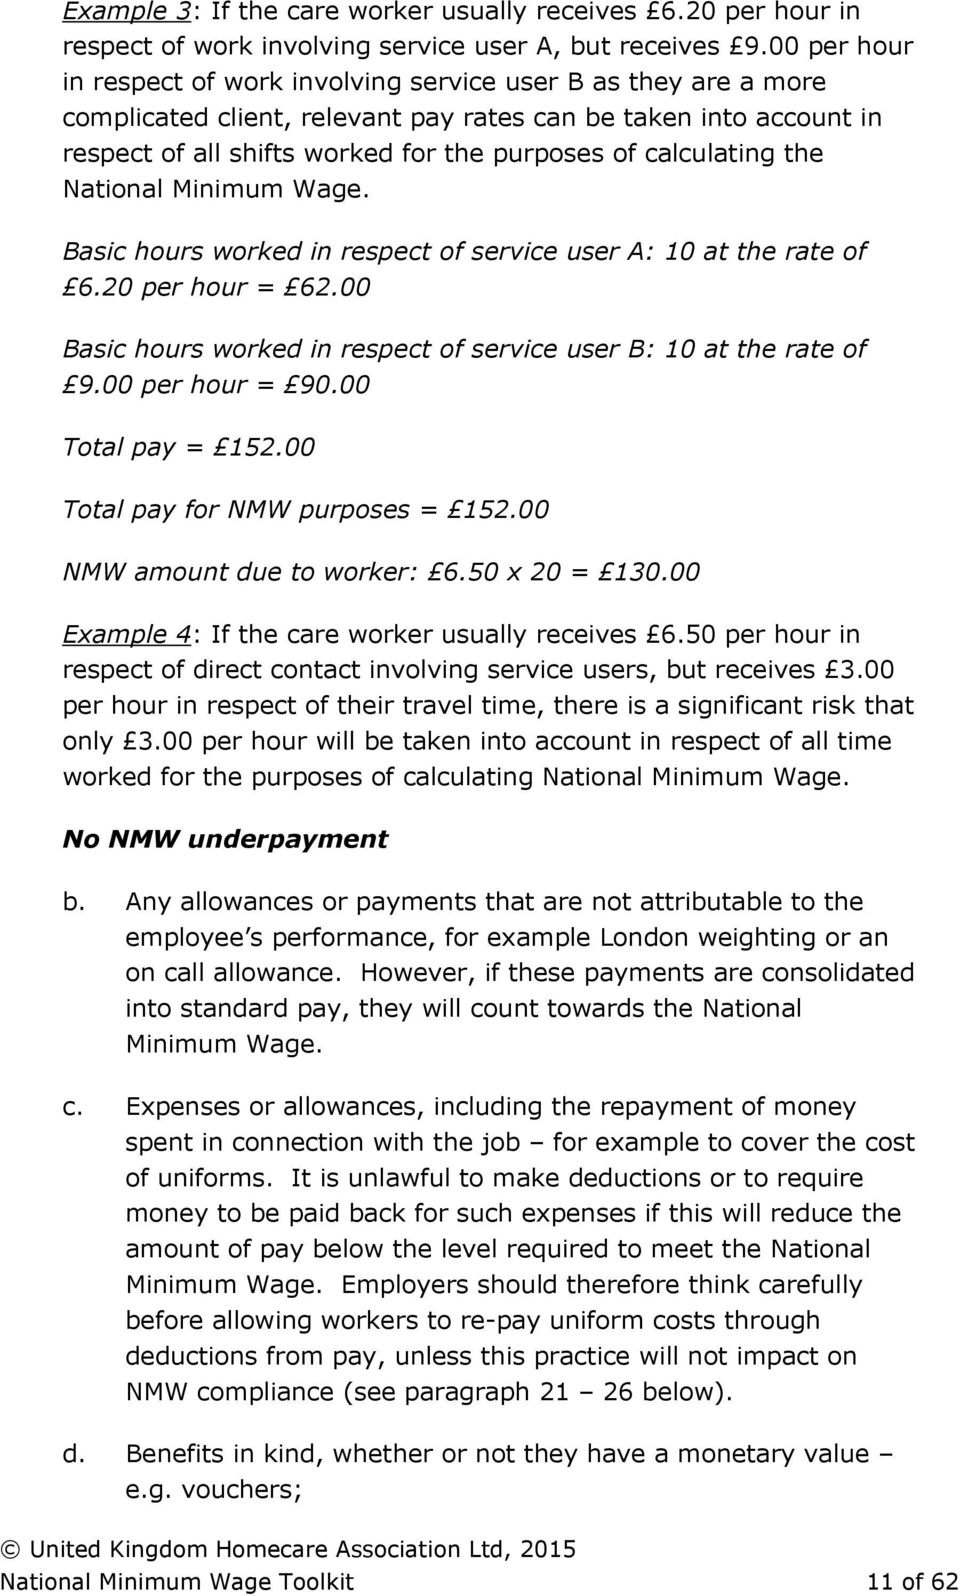 calculating the National Minimum Wage. Basic hours worked in respect of service user A: 10 at the rate of 6.20 per hour = 62.00 Basic hours worked in respect of service user B: 10 at the rate of 9.